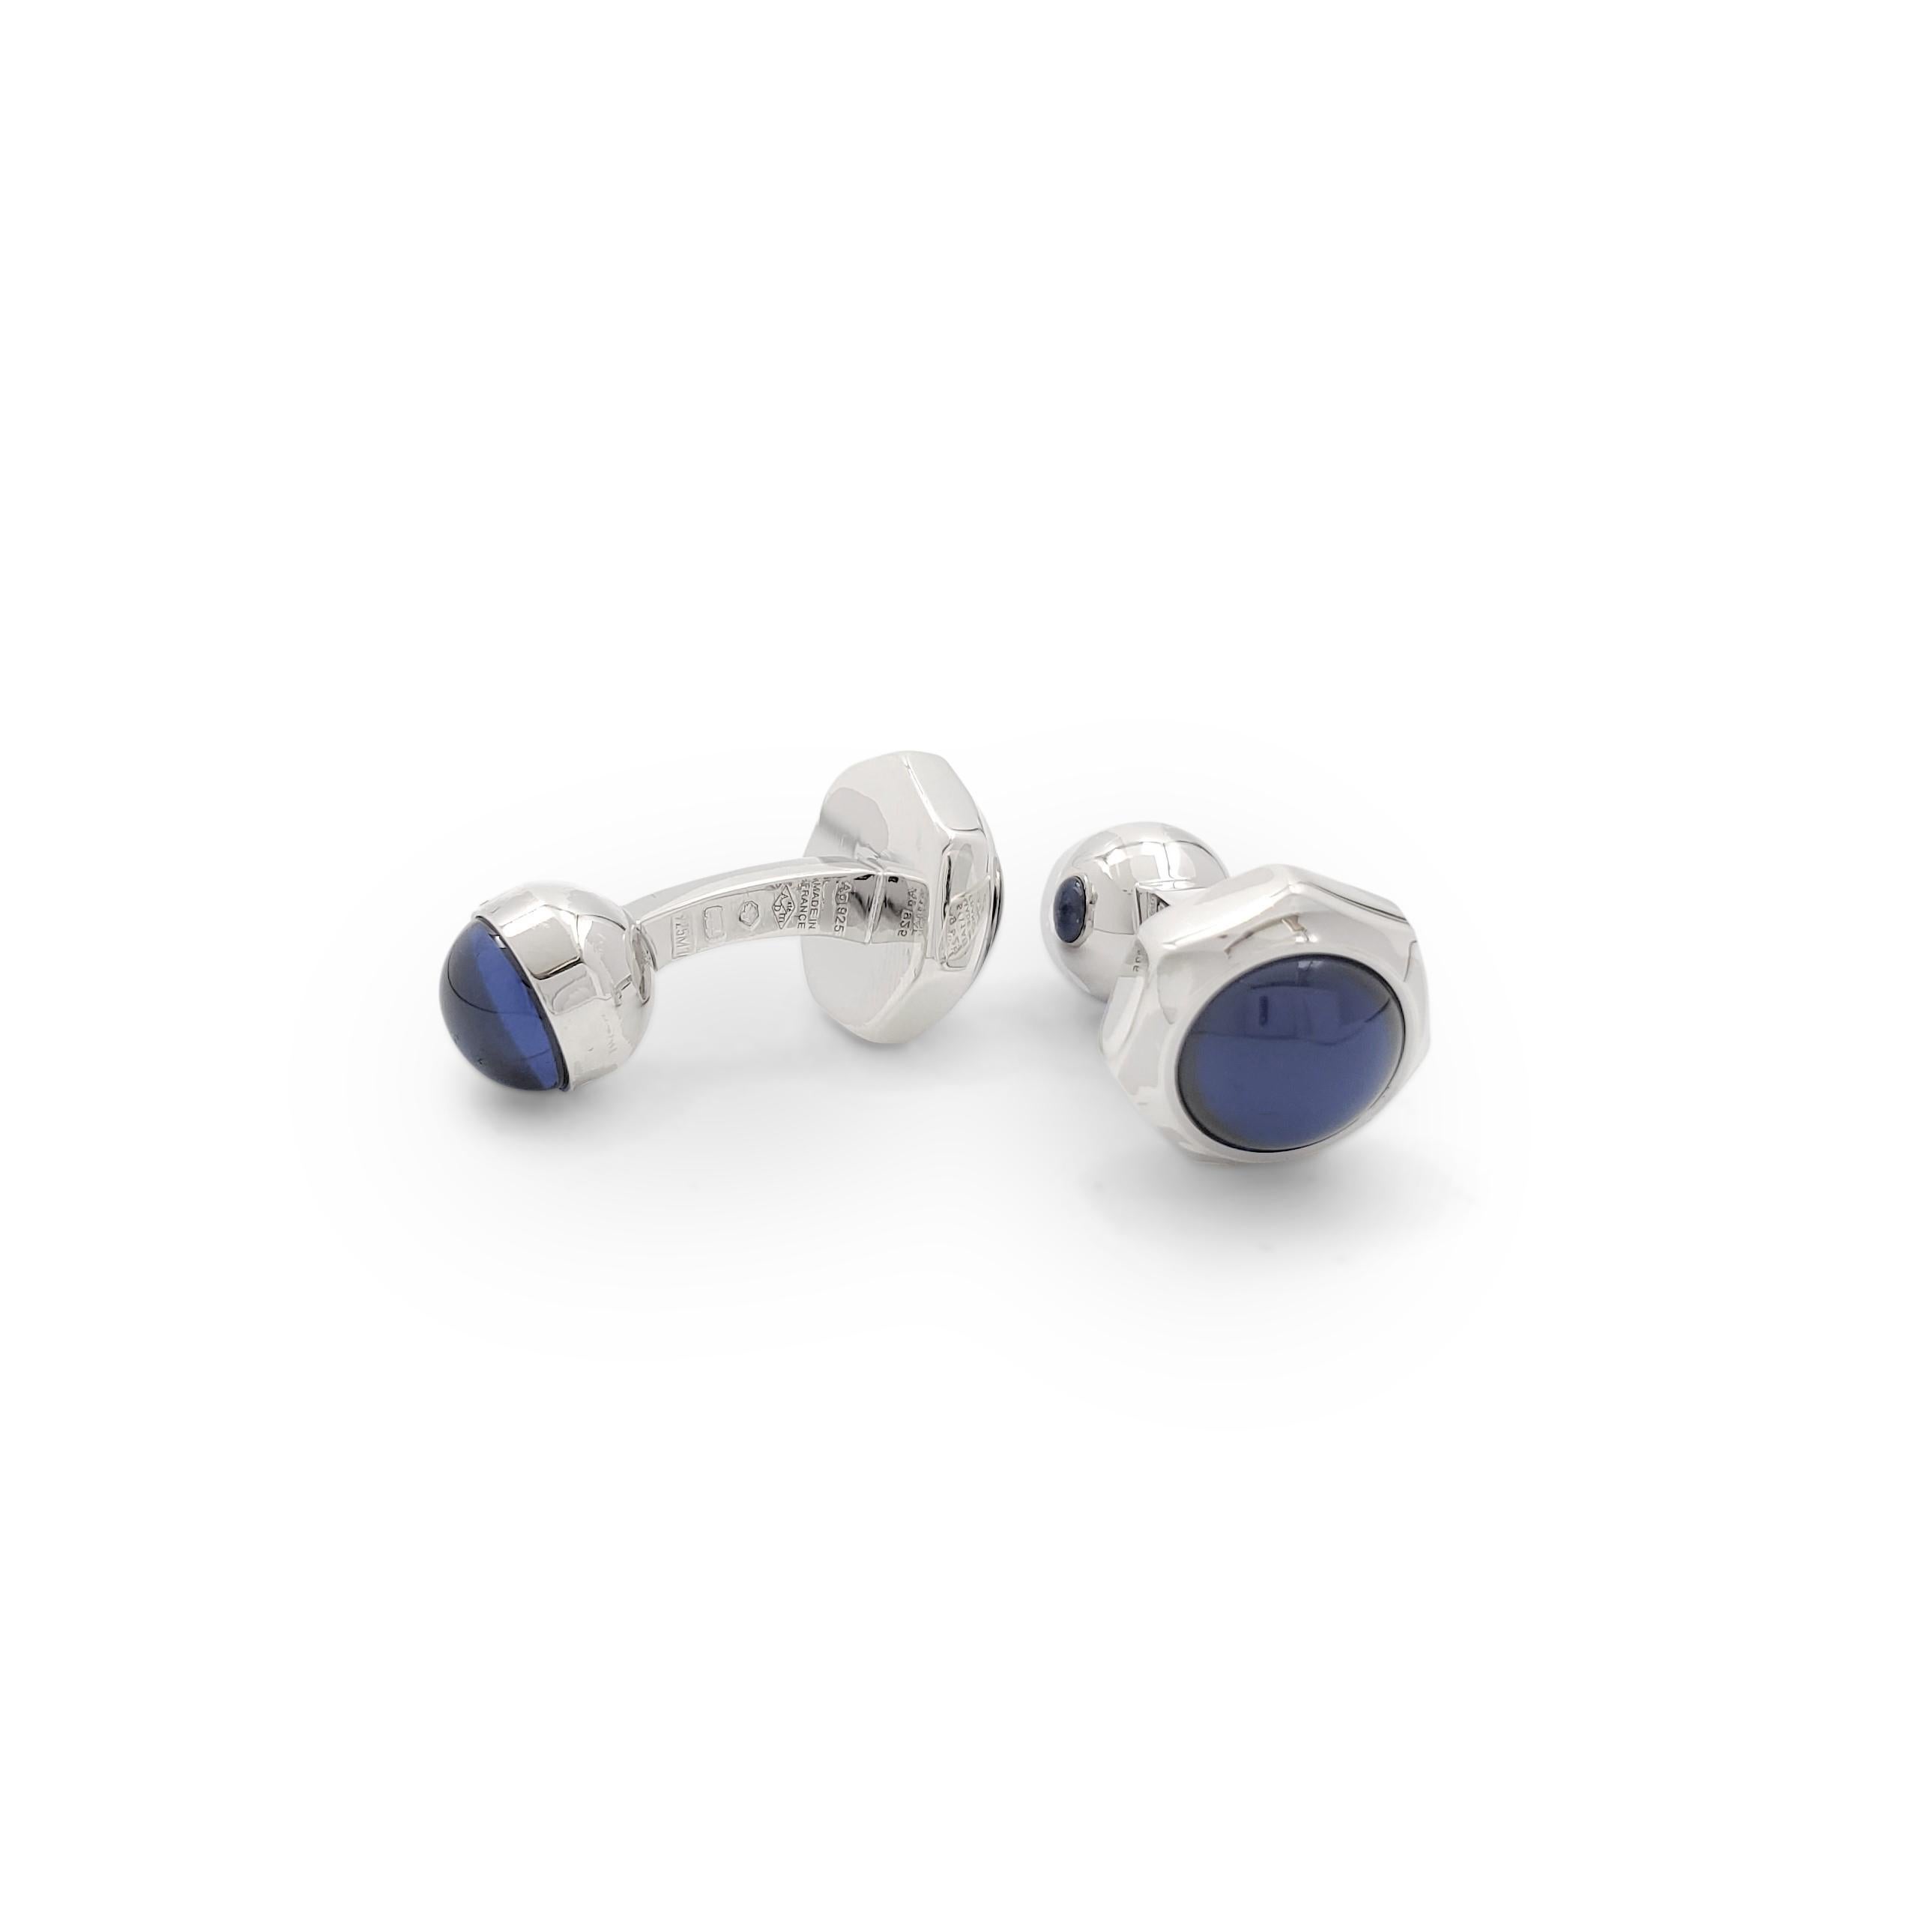 Authentic Cartier 'Santos de Cartier' cufflinks crafted in sterling silver. One end of the cufflink is a round high-polished silver half-sphere with a glowing, round cabochon synthetic spinel on top. This end has the Cartier signature. The other end